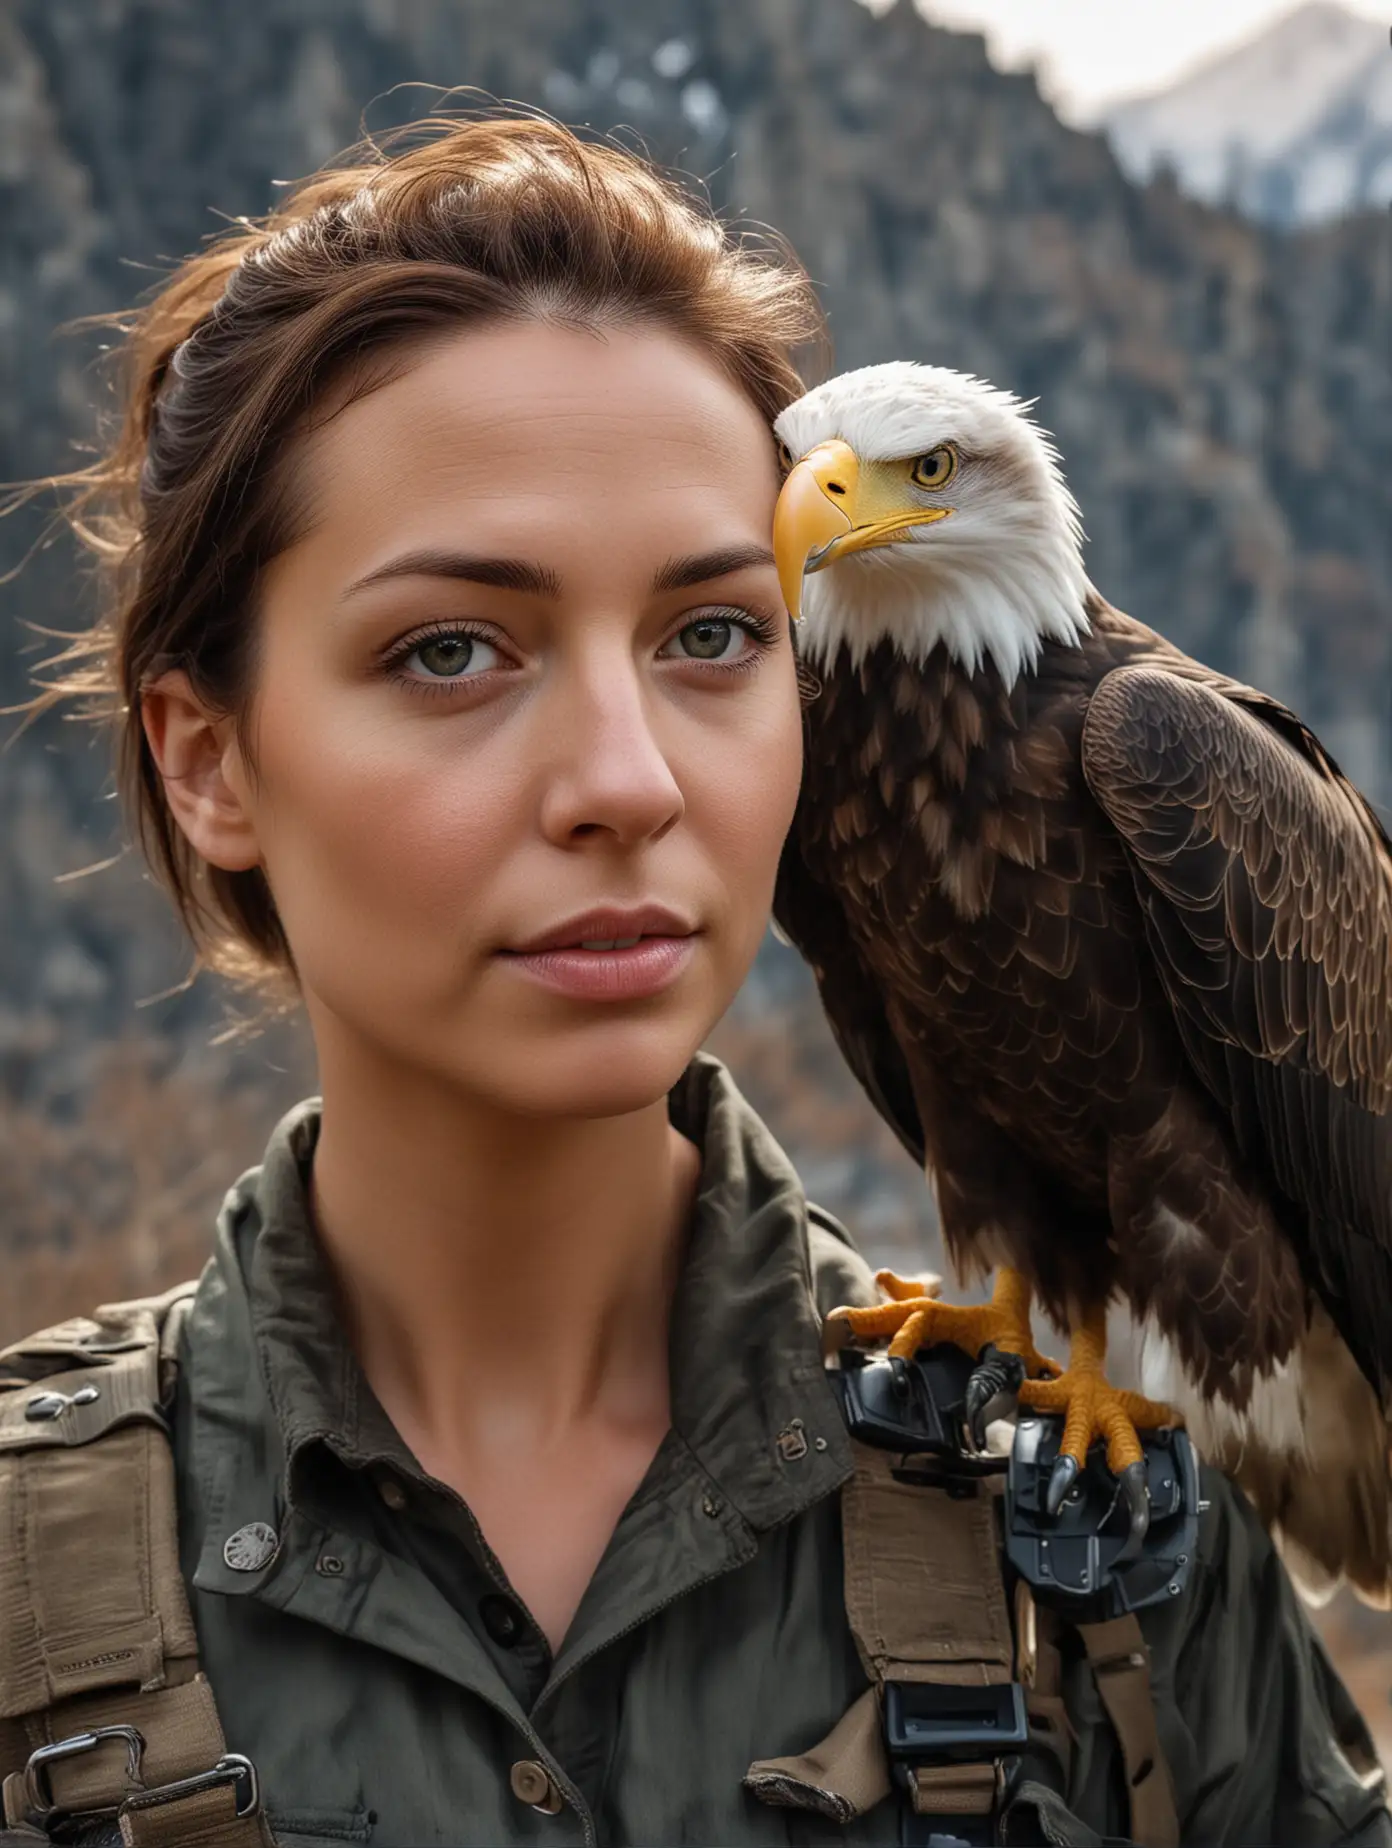 Exquisite Woman Poses with Bald Eagle for Professional Outdoor Portrait